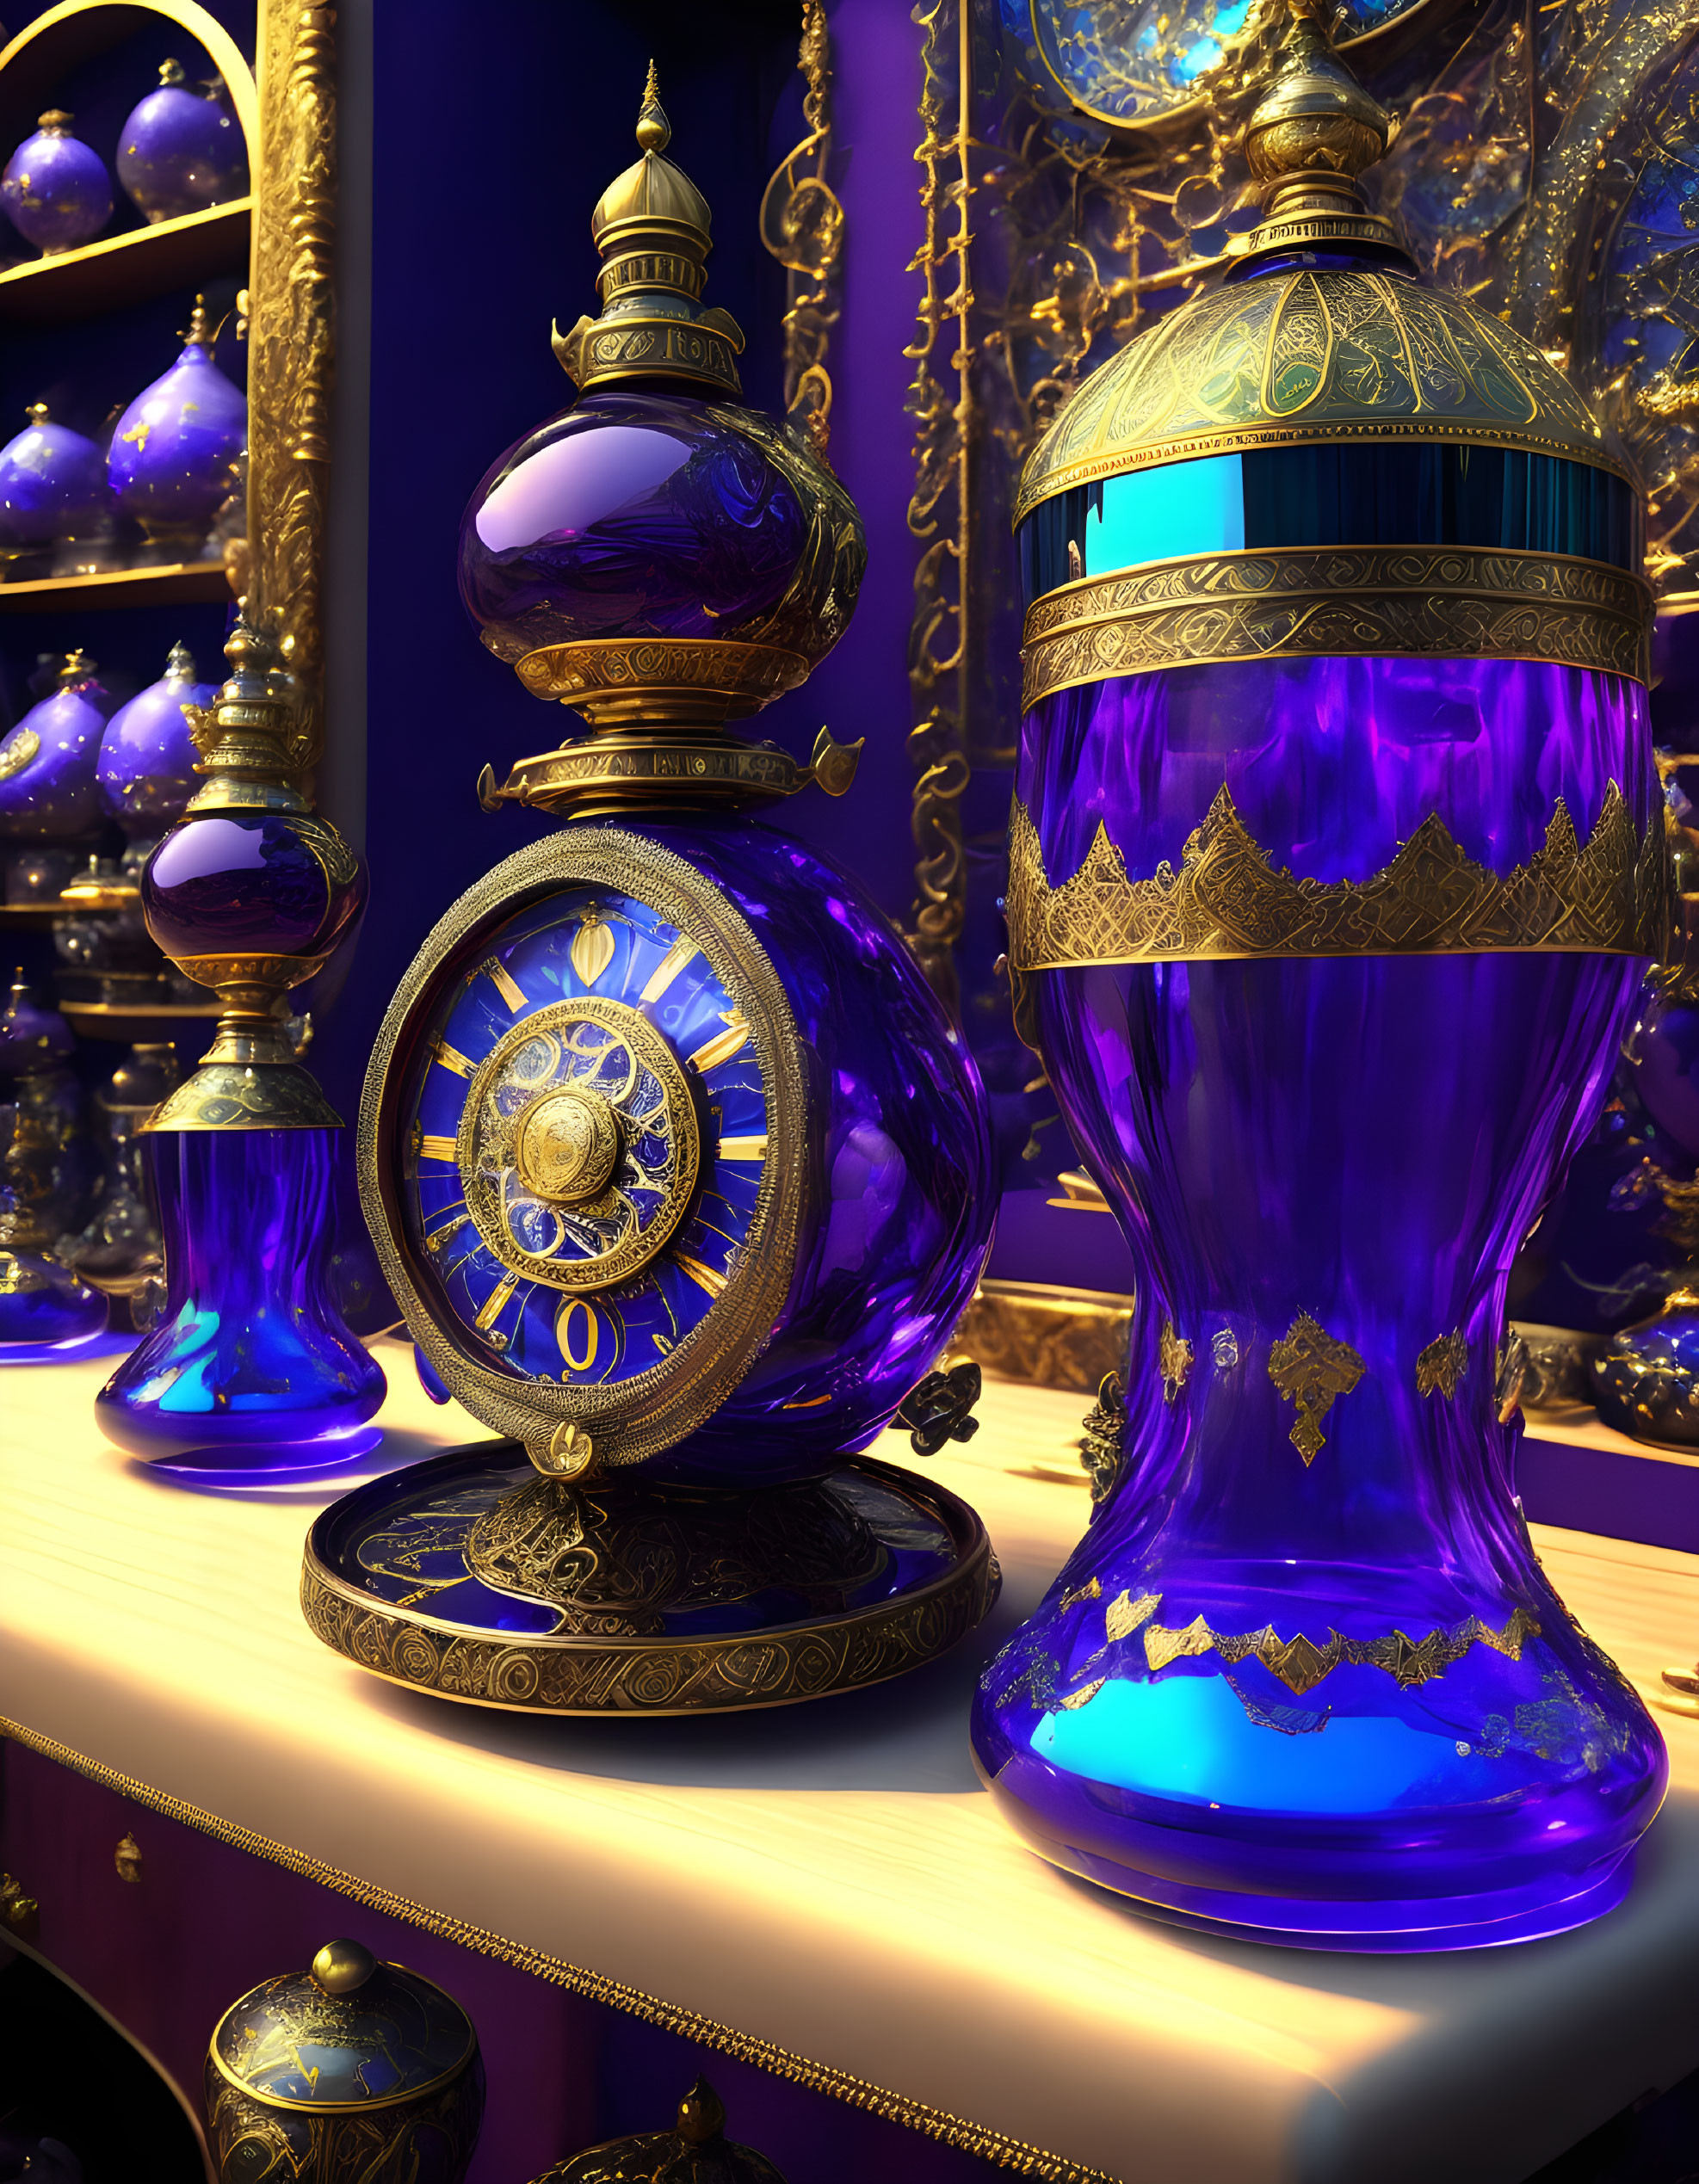 Luxurious golden and purple hourglasses with intricate designs on matching spherical objects and ornate patterns